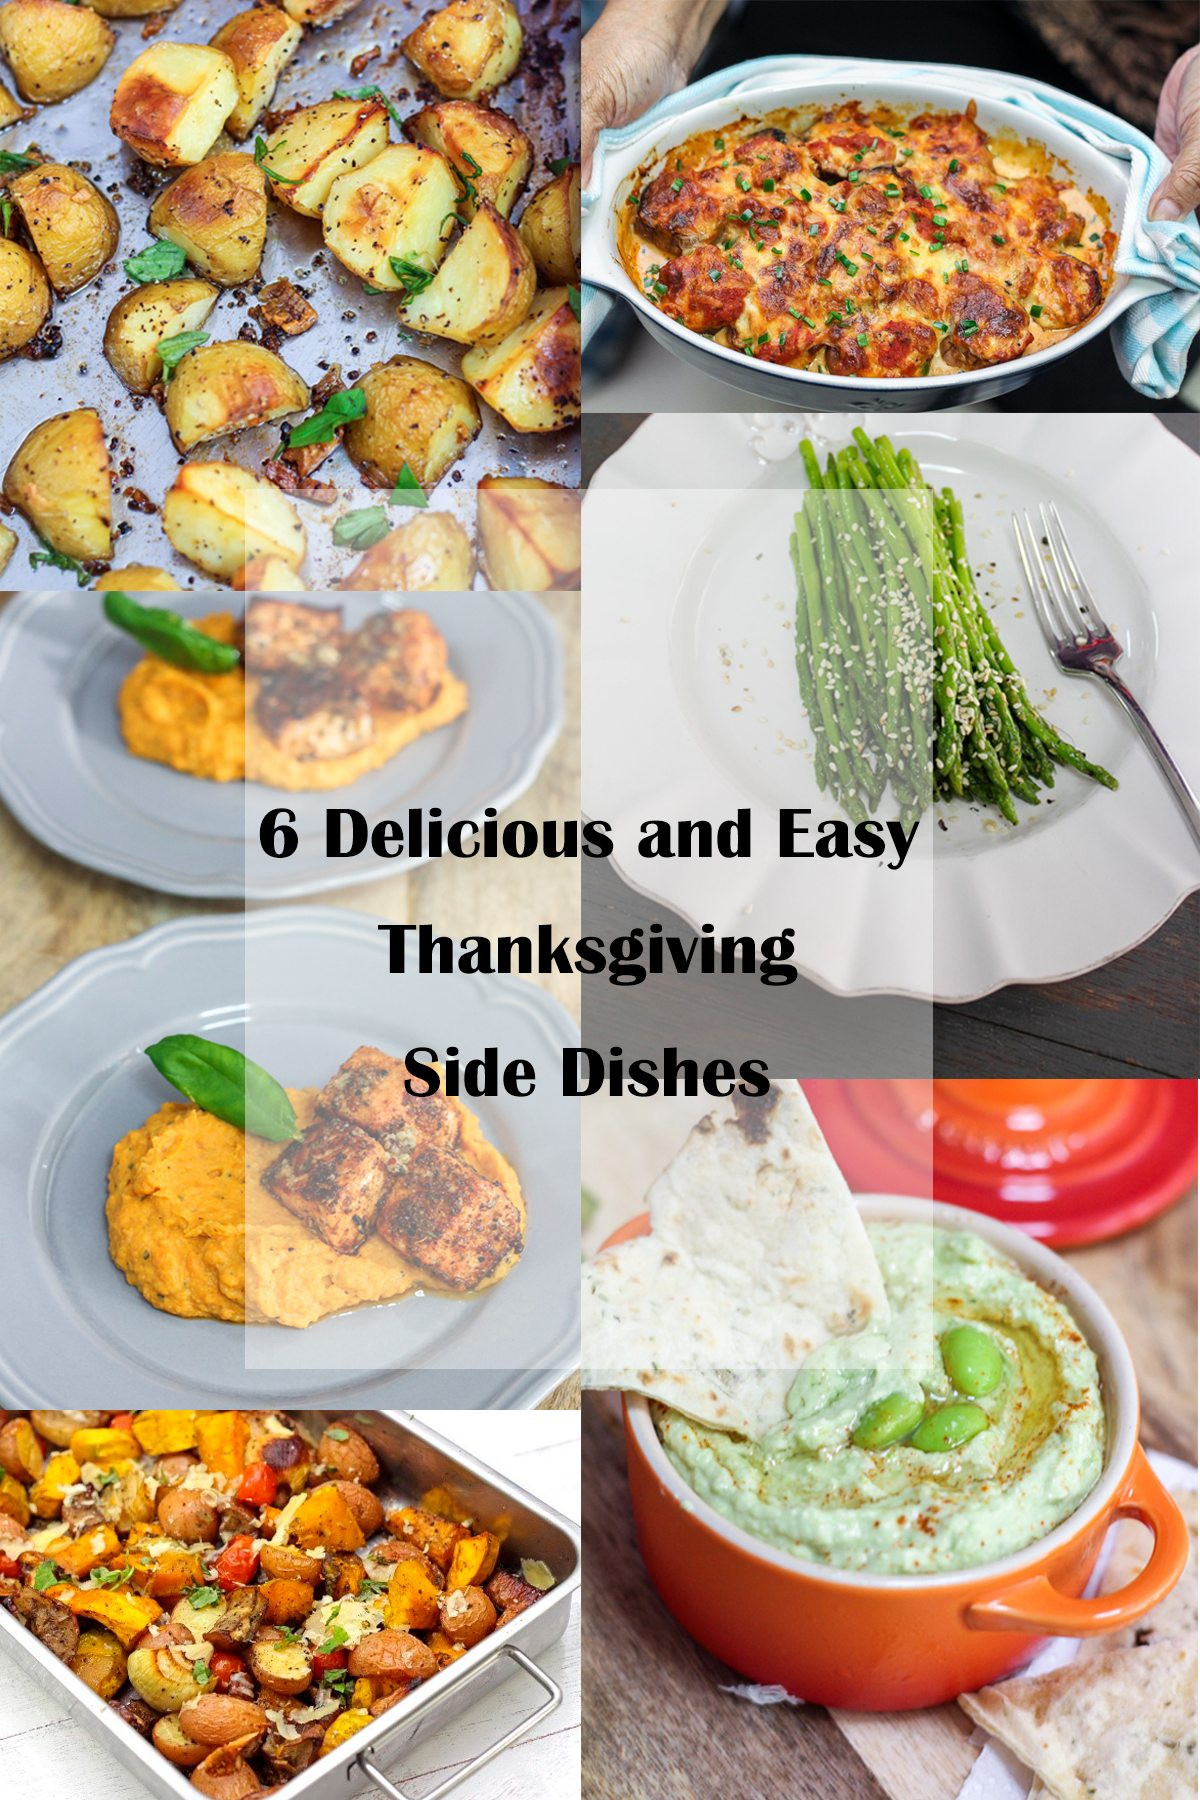 Delicious Thanksgiving Side Dishes
 6 Delicious and Easy Thanksgiving Side Dishes